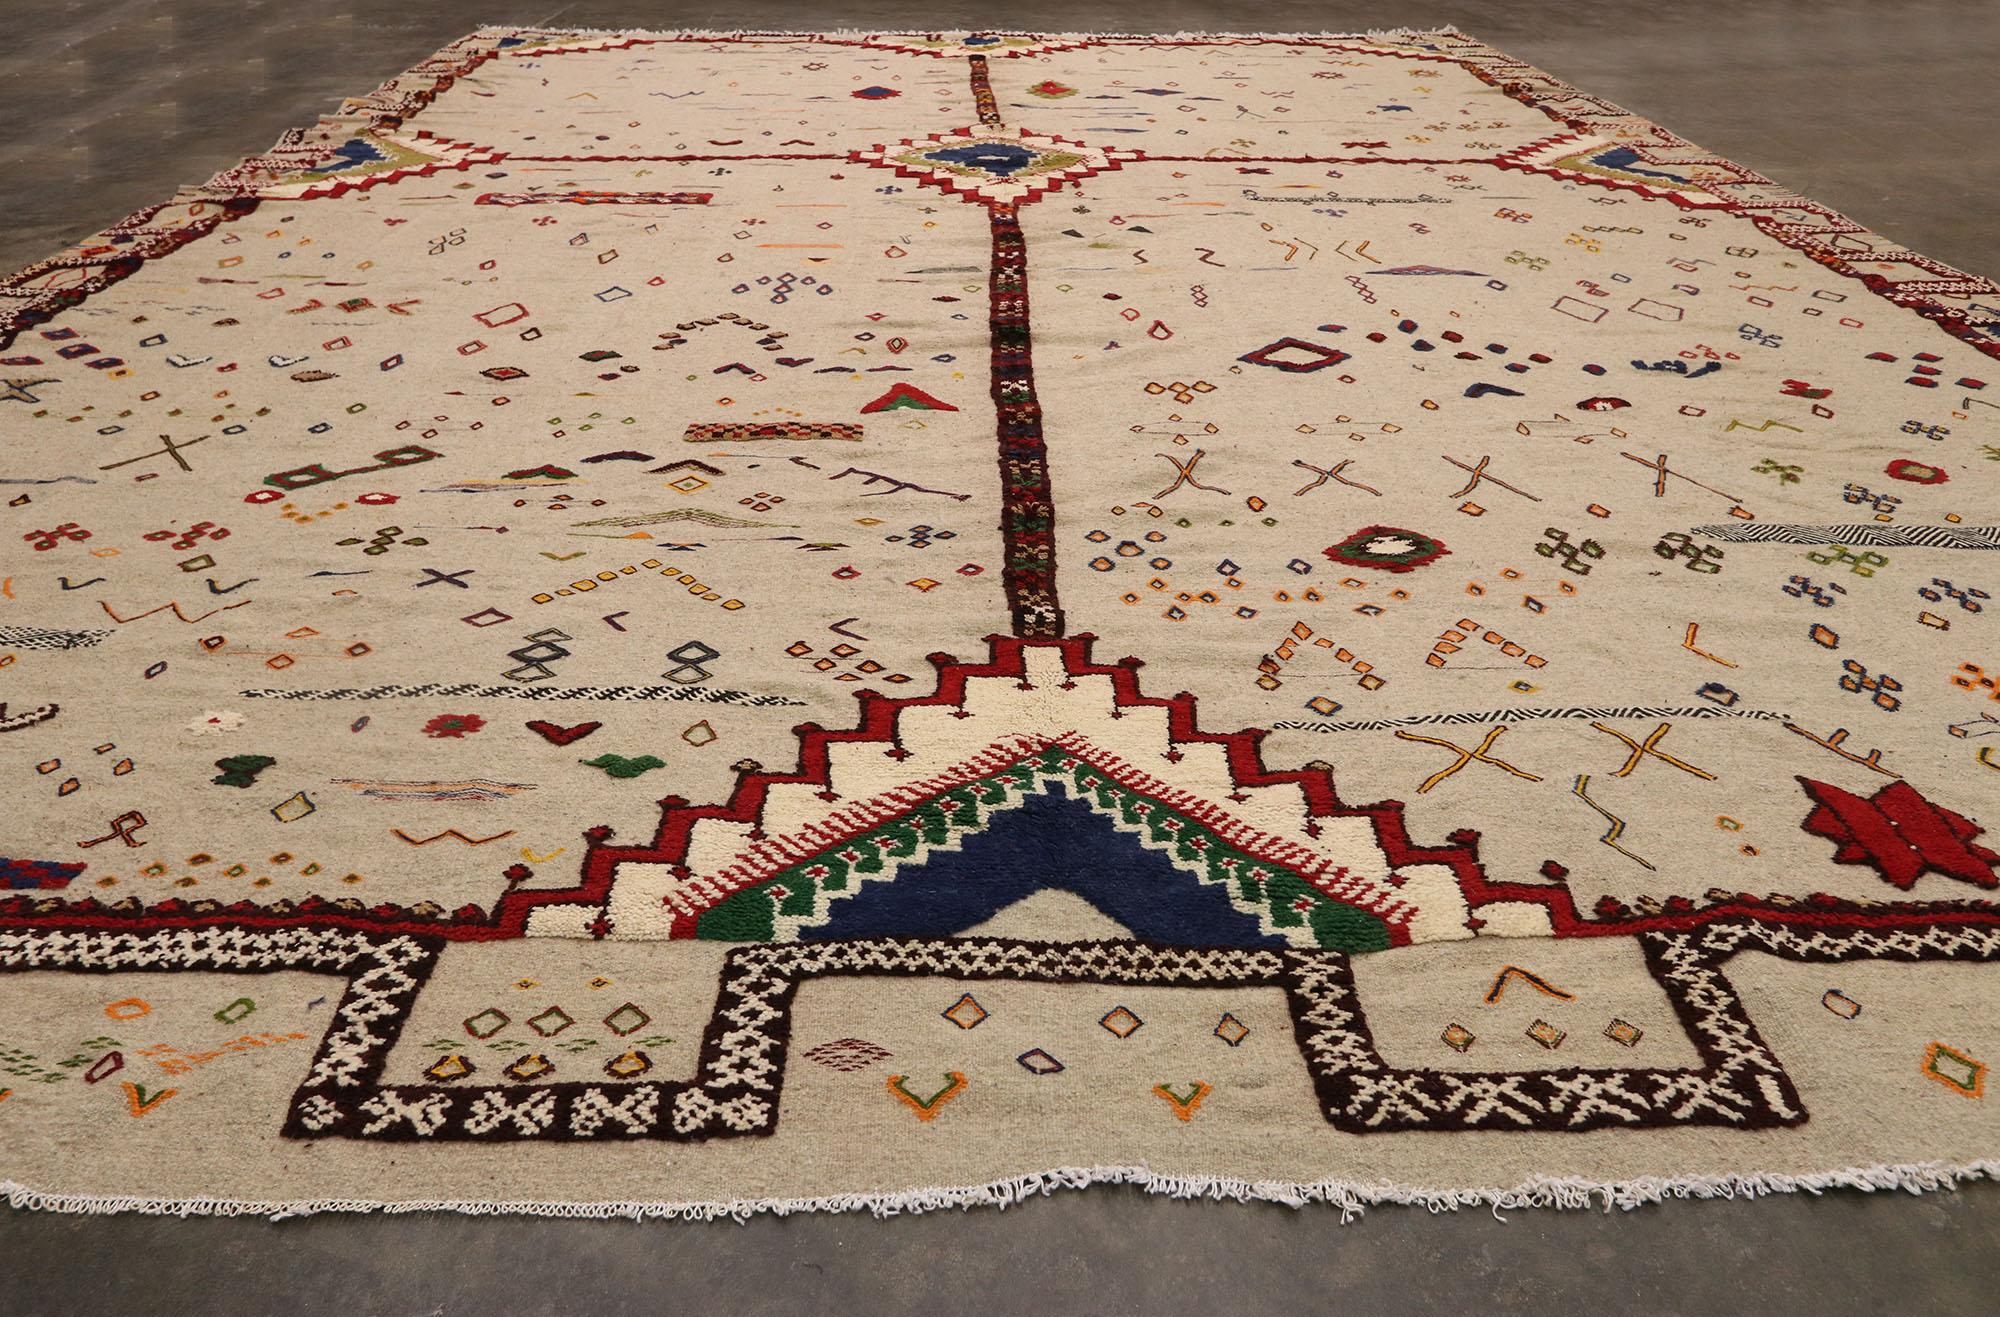 20th Century Vintage Berber Glaoui High-Low Souf Moroccan Rug For Sale